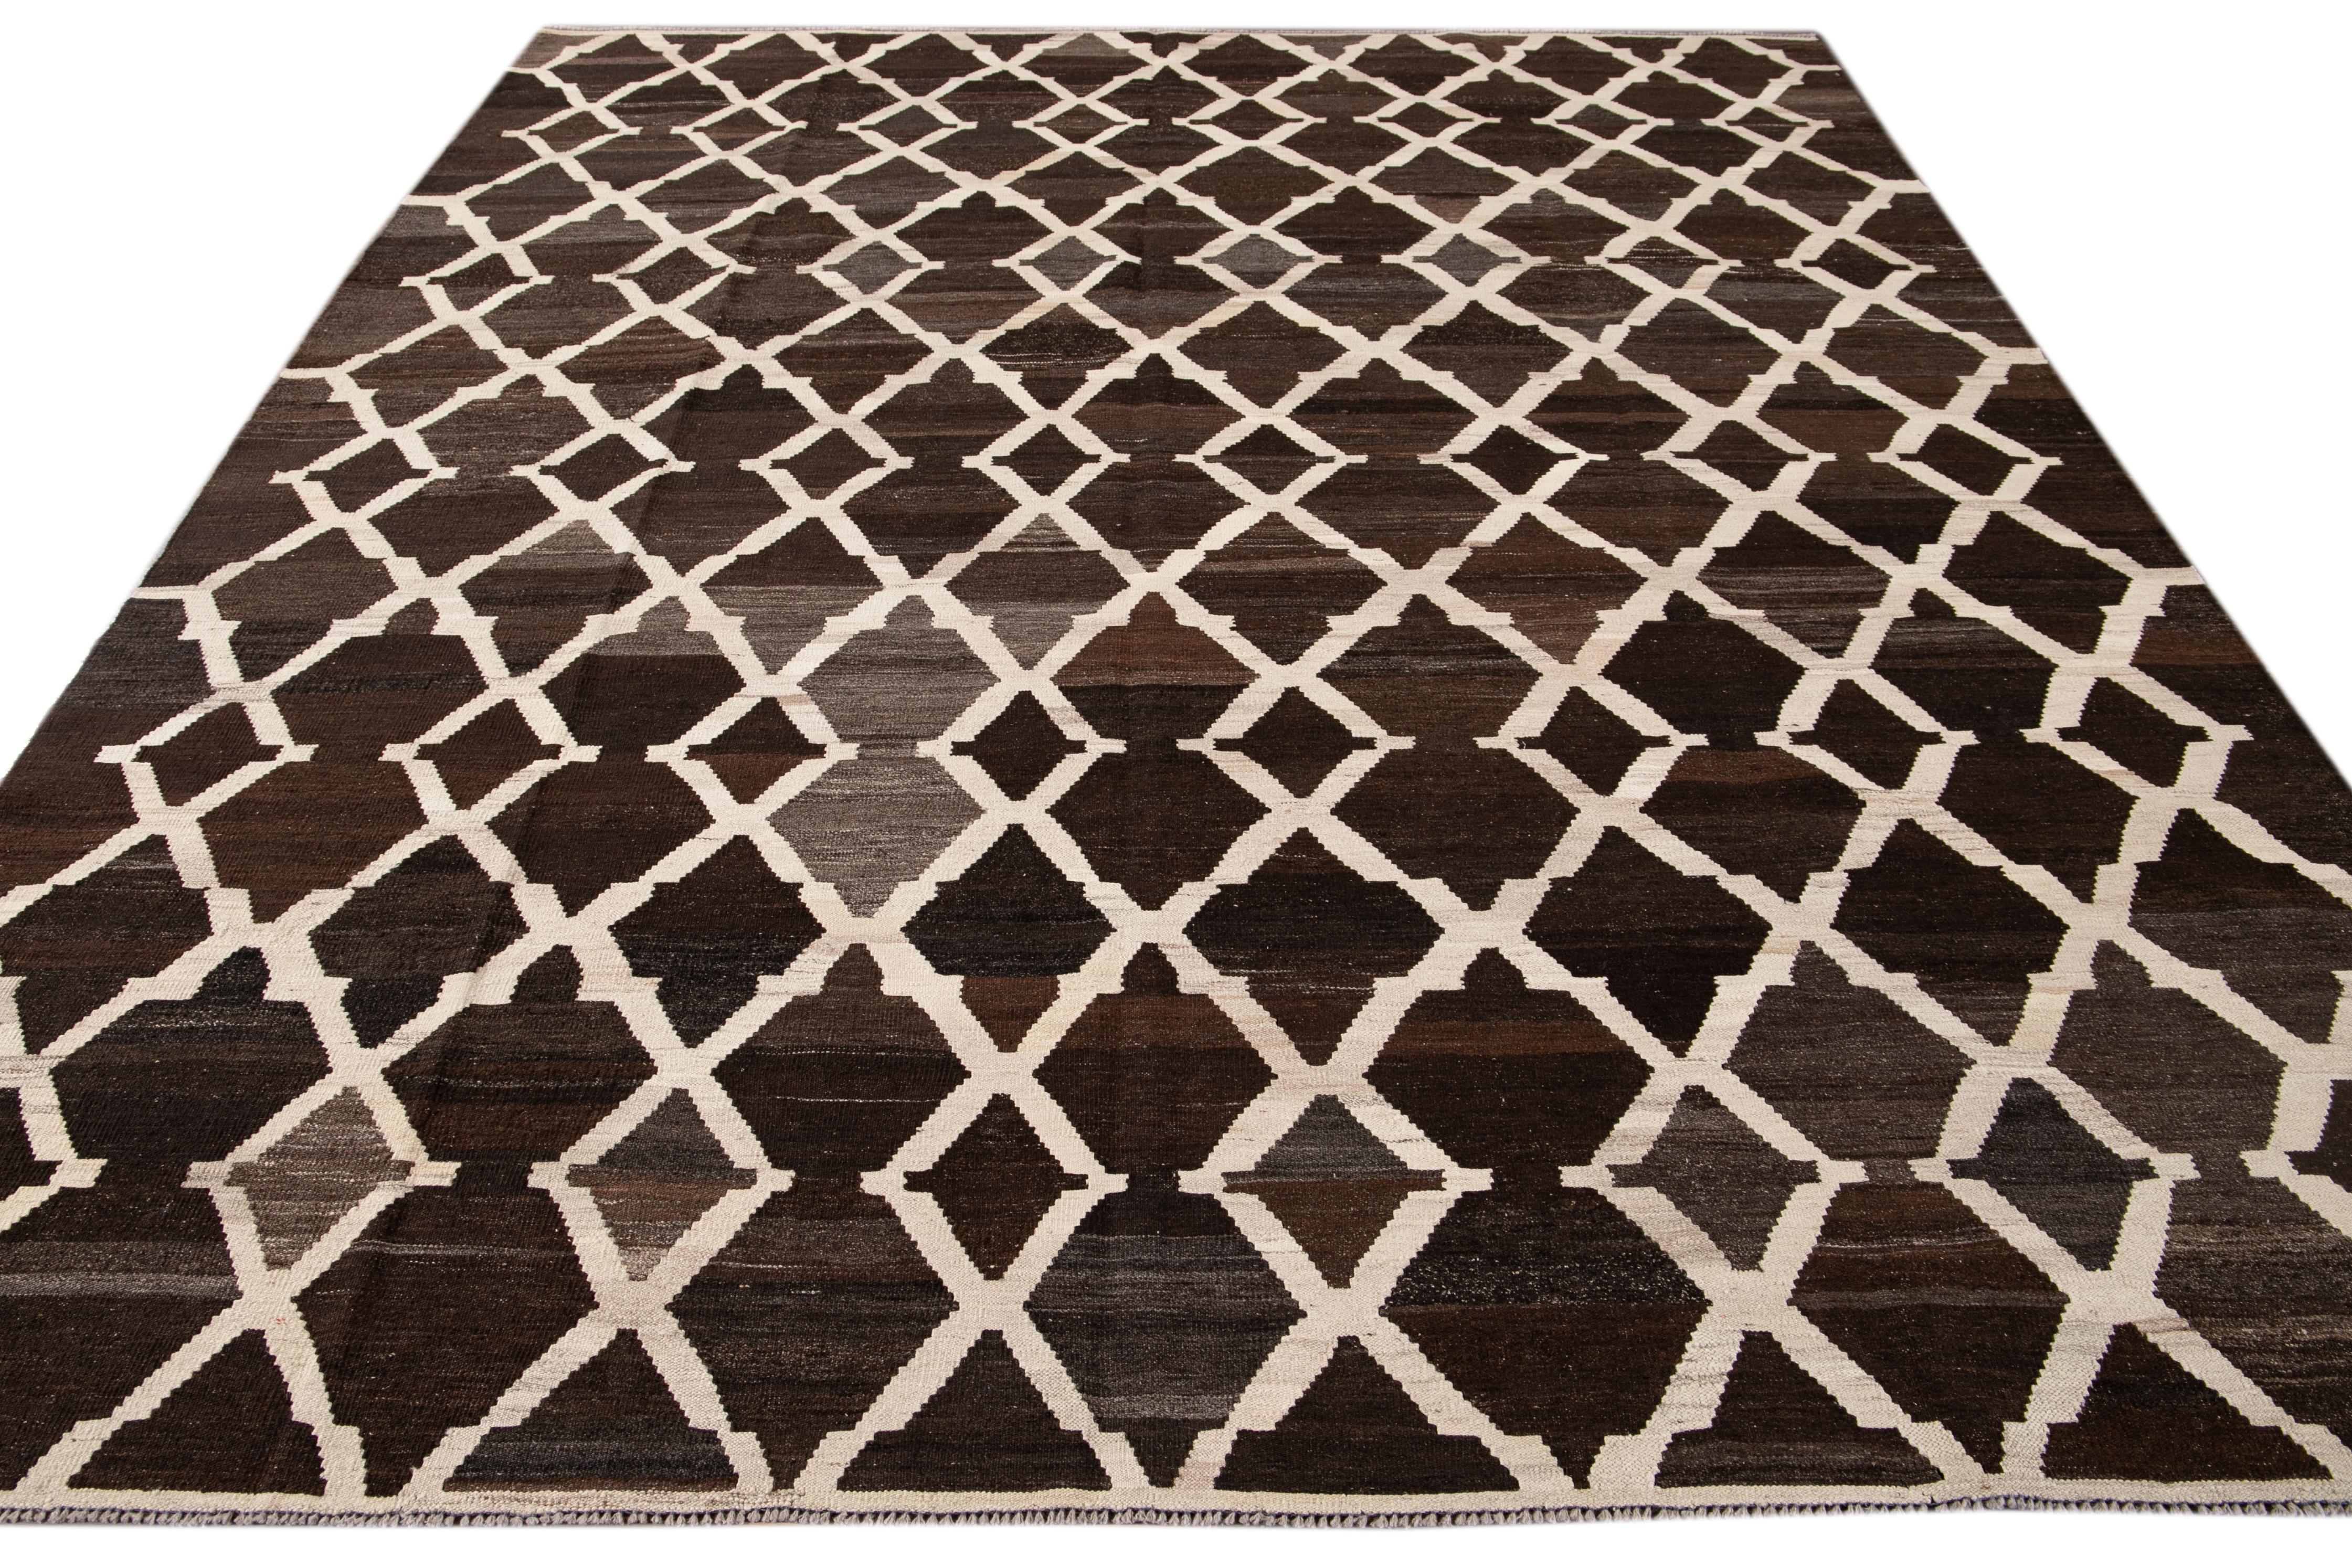 Beautiful hand-knotted flat-weave kilim wool rug. This rug has a dark brown field with ivory accents in an all-over tracery design.

This rug measures 8' 7